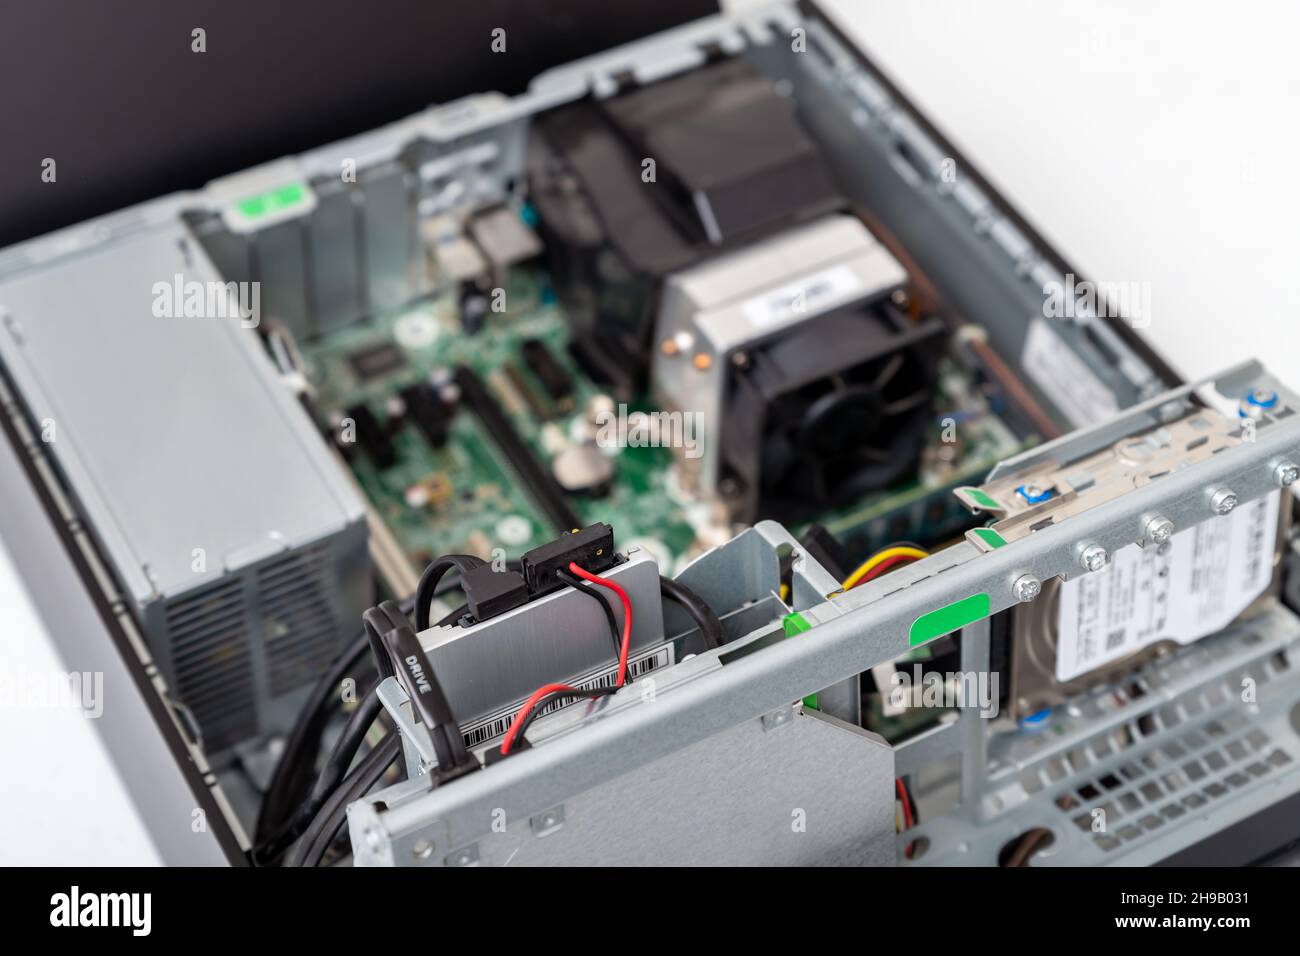 Closed-up view of SSD Hard disk drive with connectors inside of business desktop PC Stock Photo